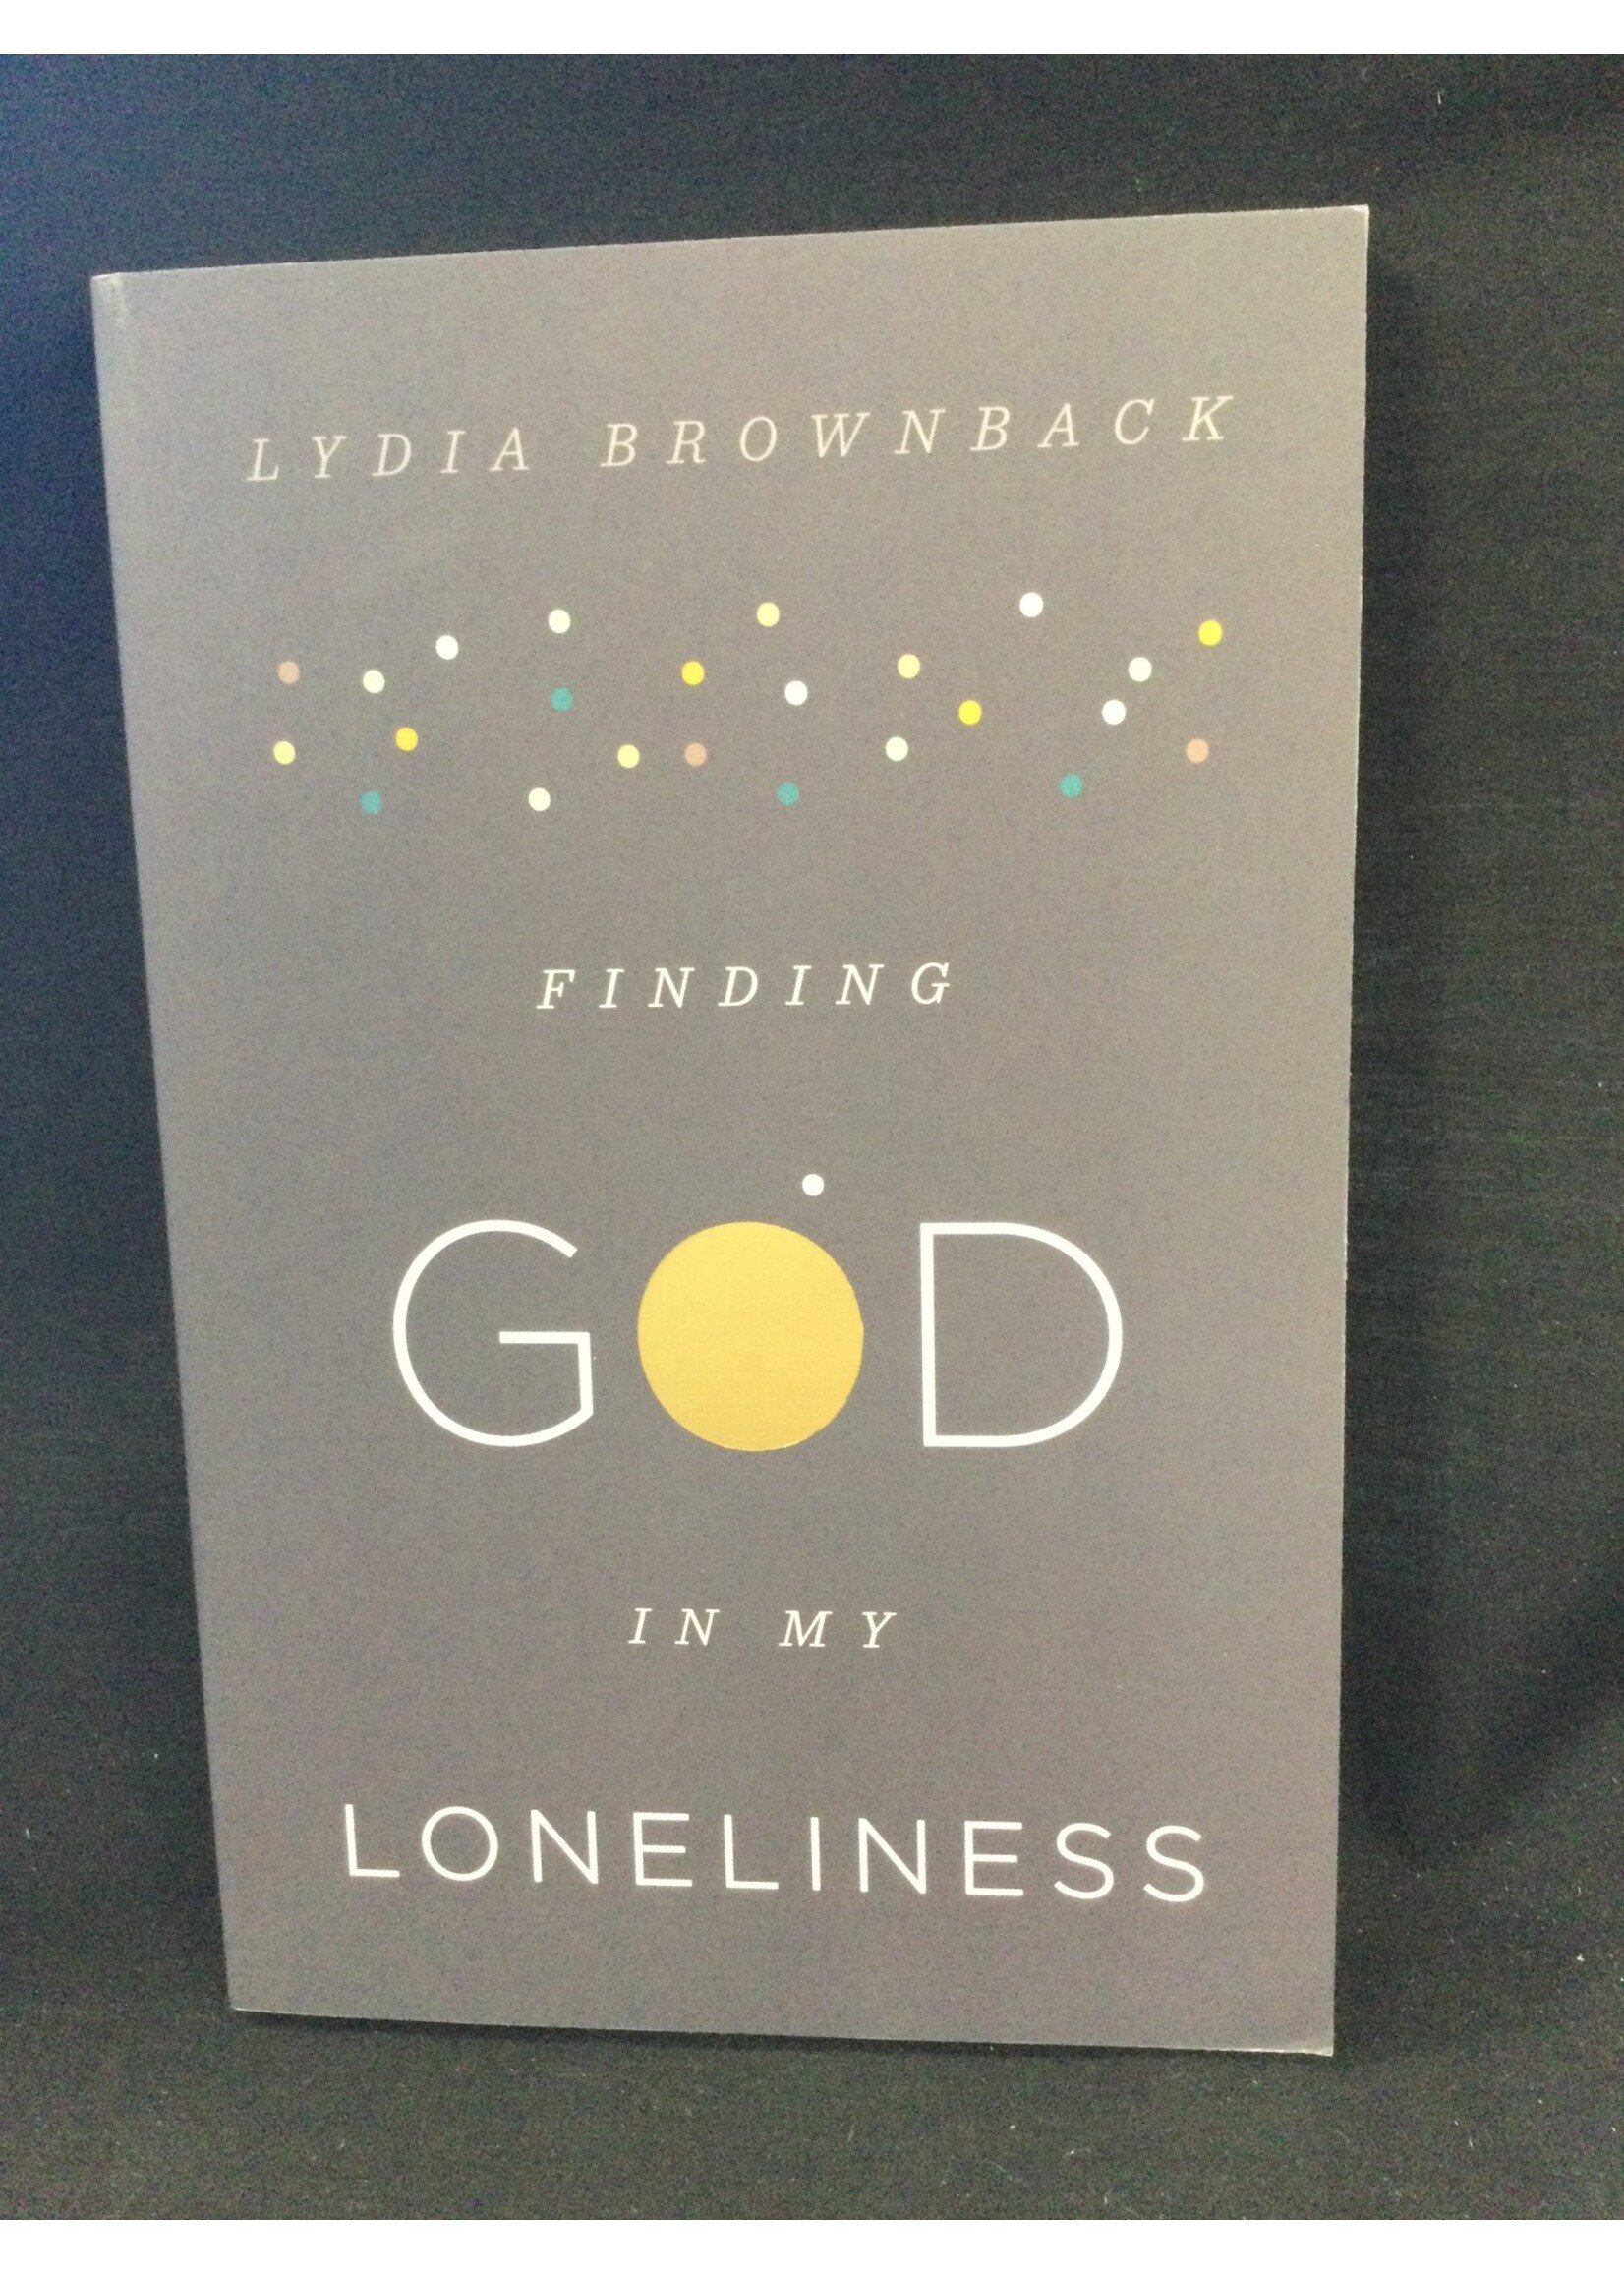 FINDING GOD IN MY LONELINESS